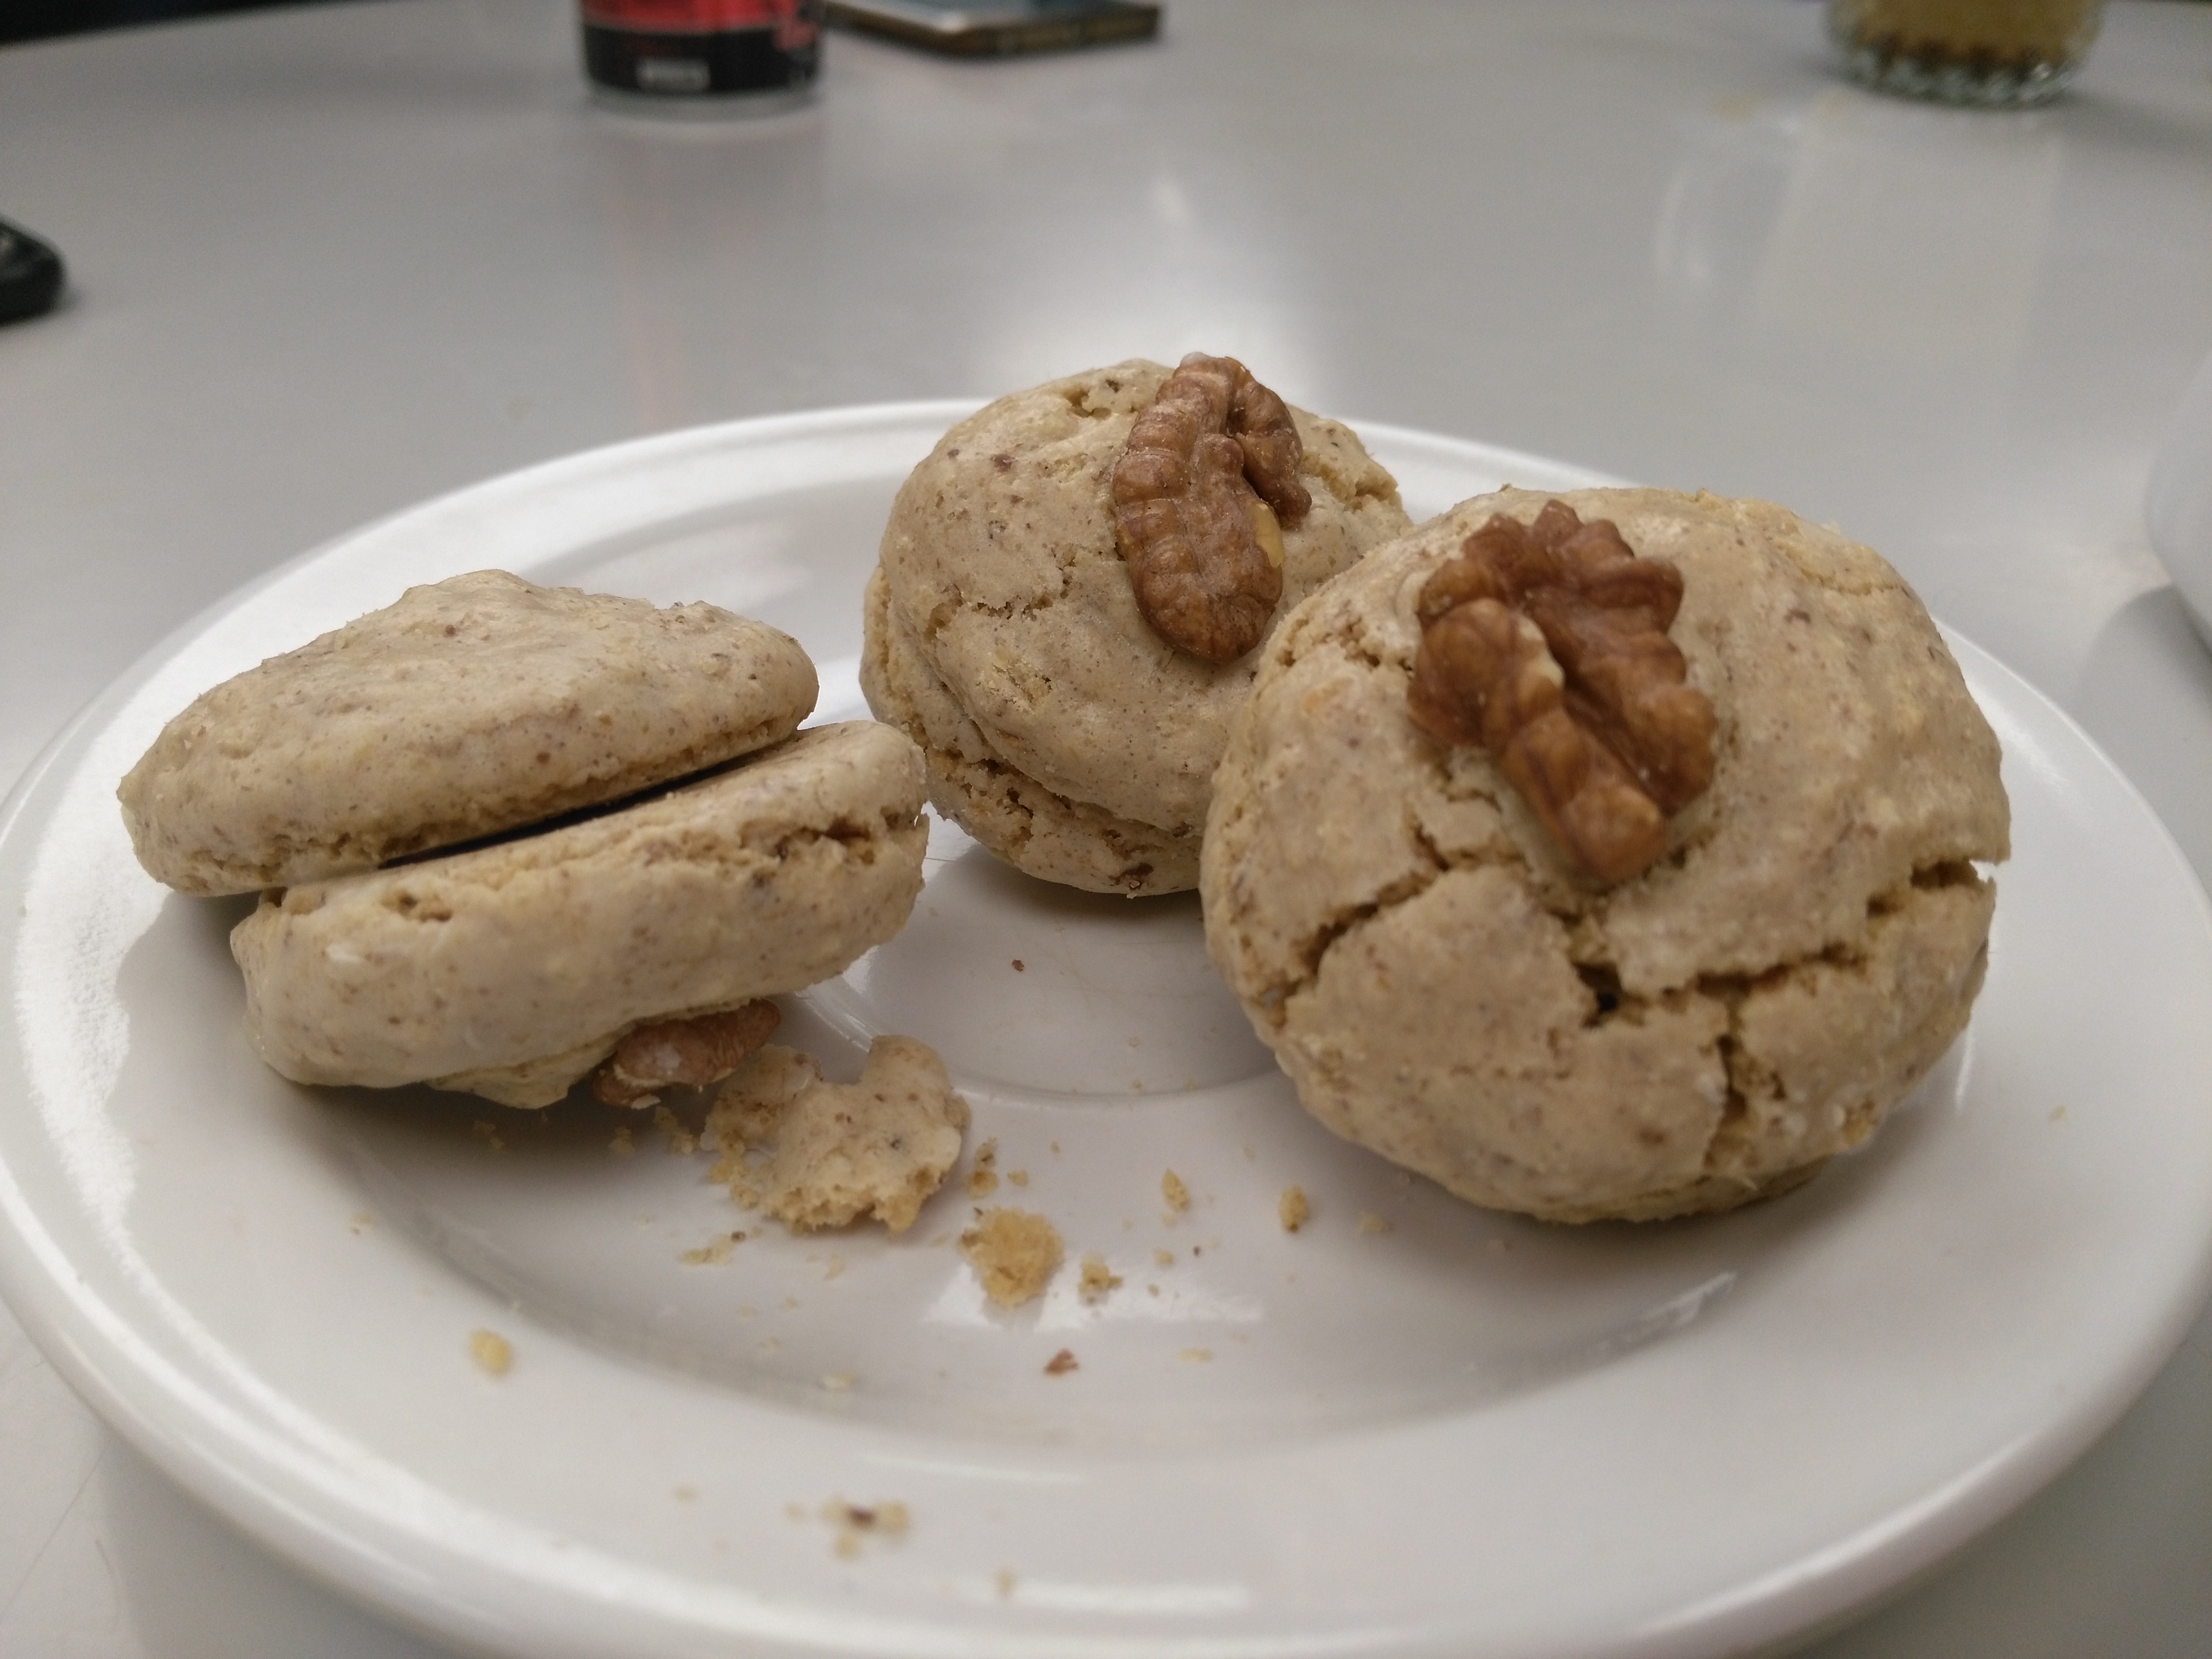 Some kind of very delicious cookie with walnuts.